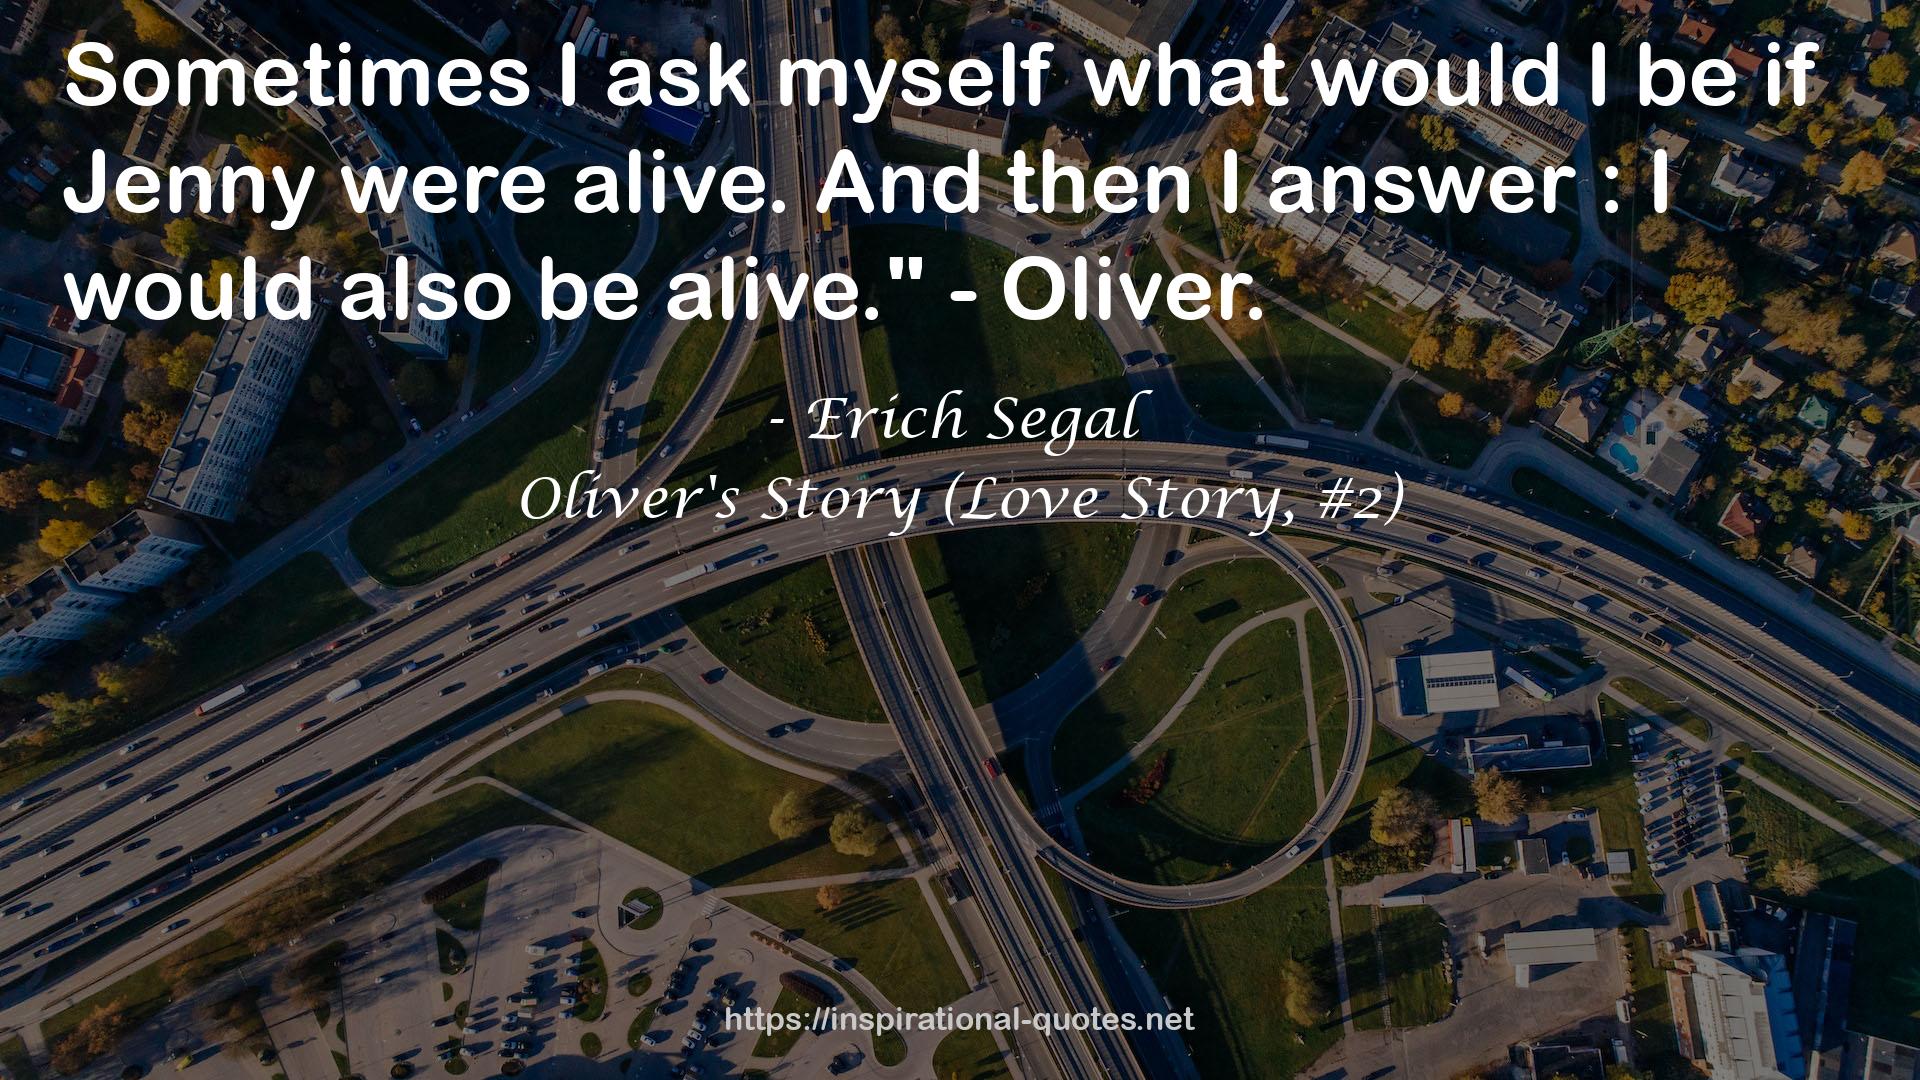 Oliver's Story (Love Story, #2) QUOTES